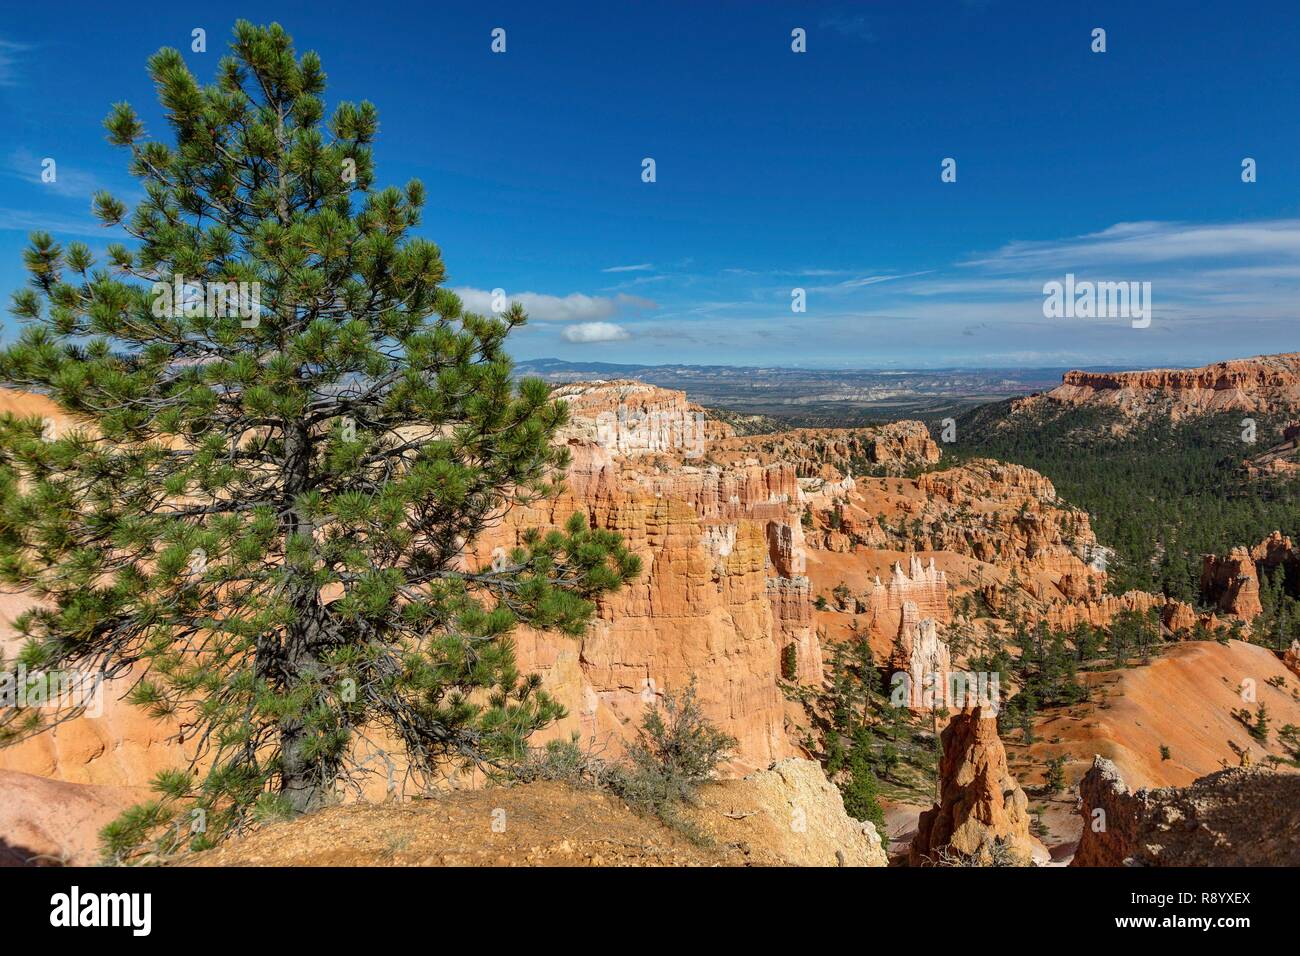 United States, Utah, Bryce Canyon National Park, an impressive geological site where hundreds of hoodoos can be seen, shaped by erosion, with colors ranging from red to white to orange Stock Photo